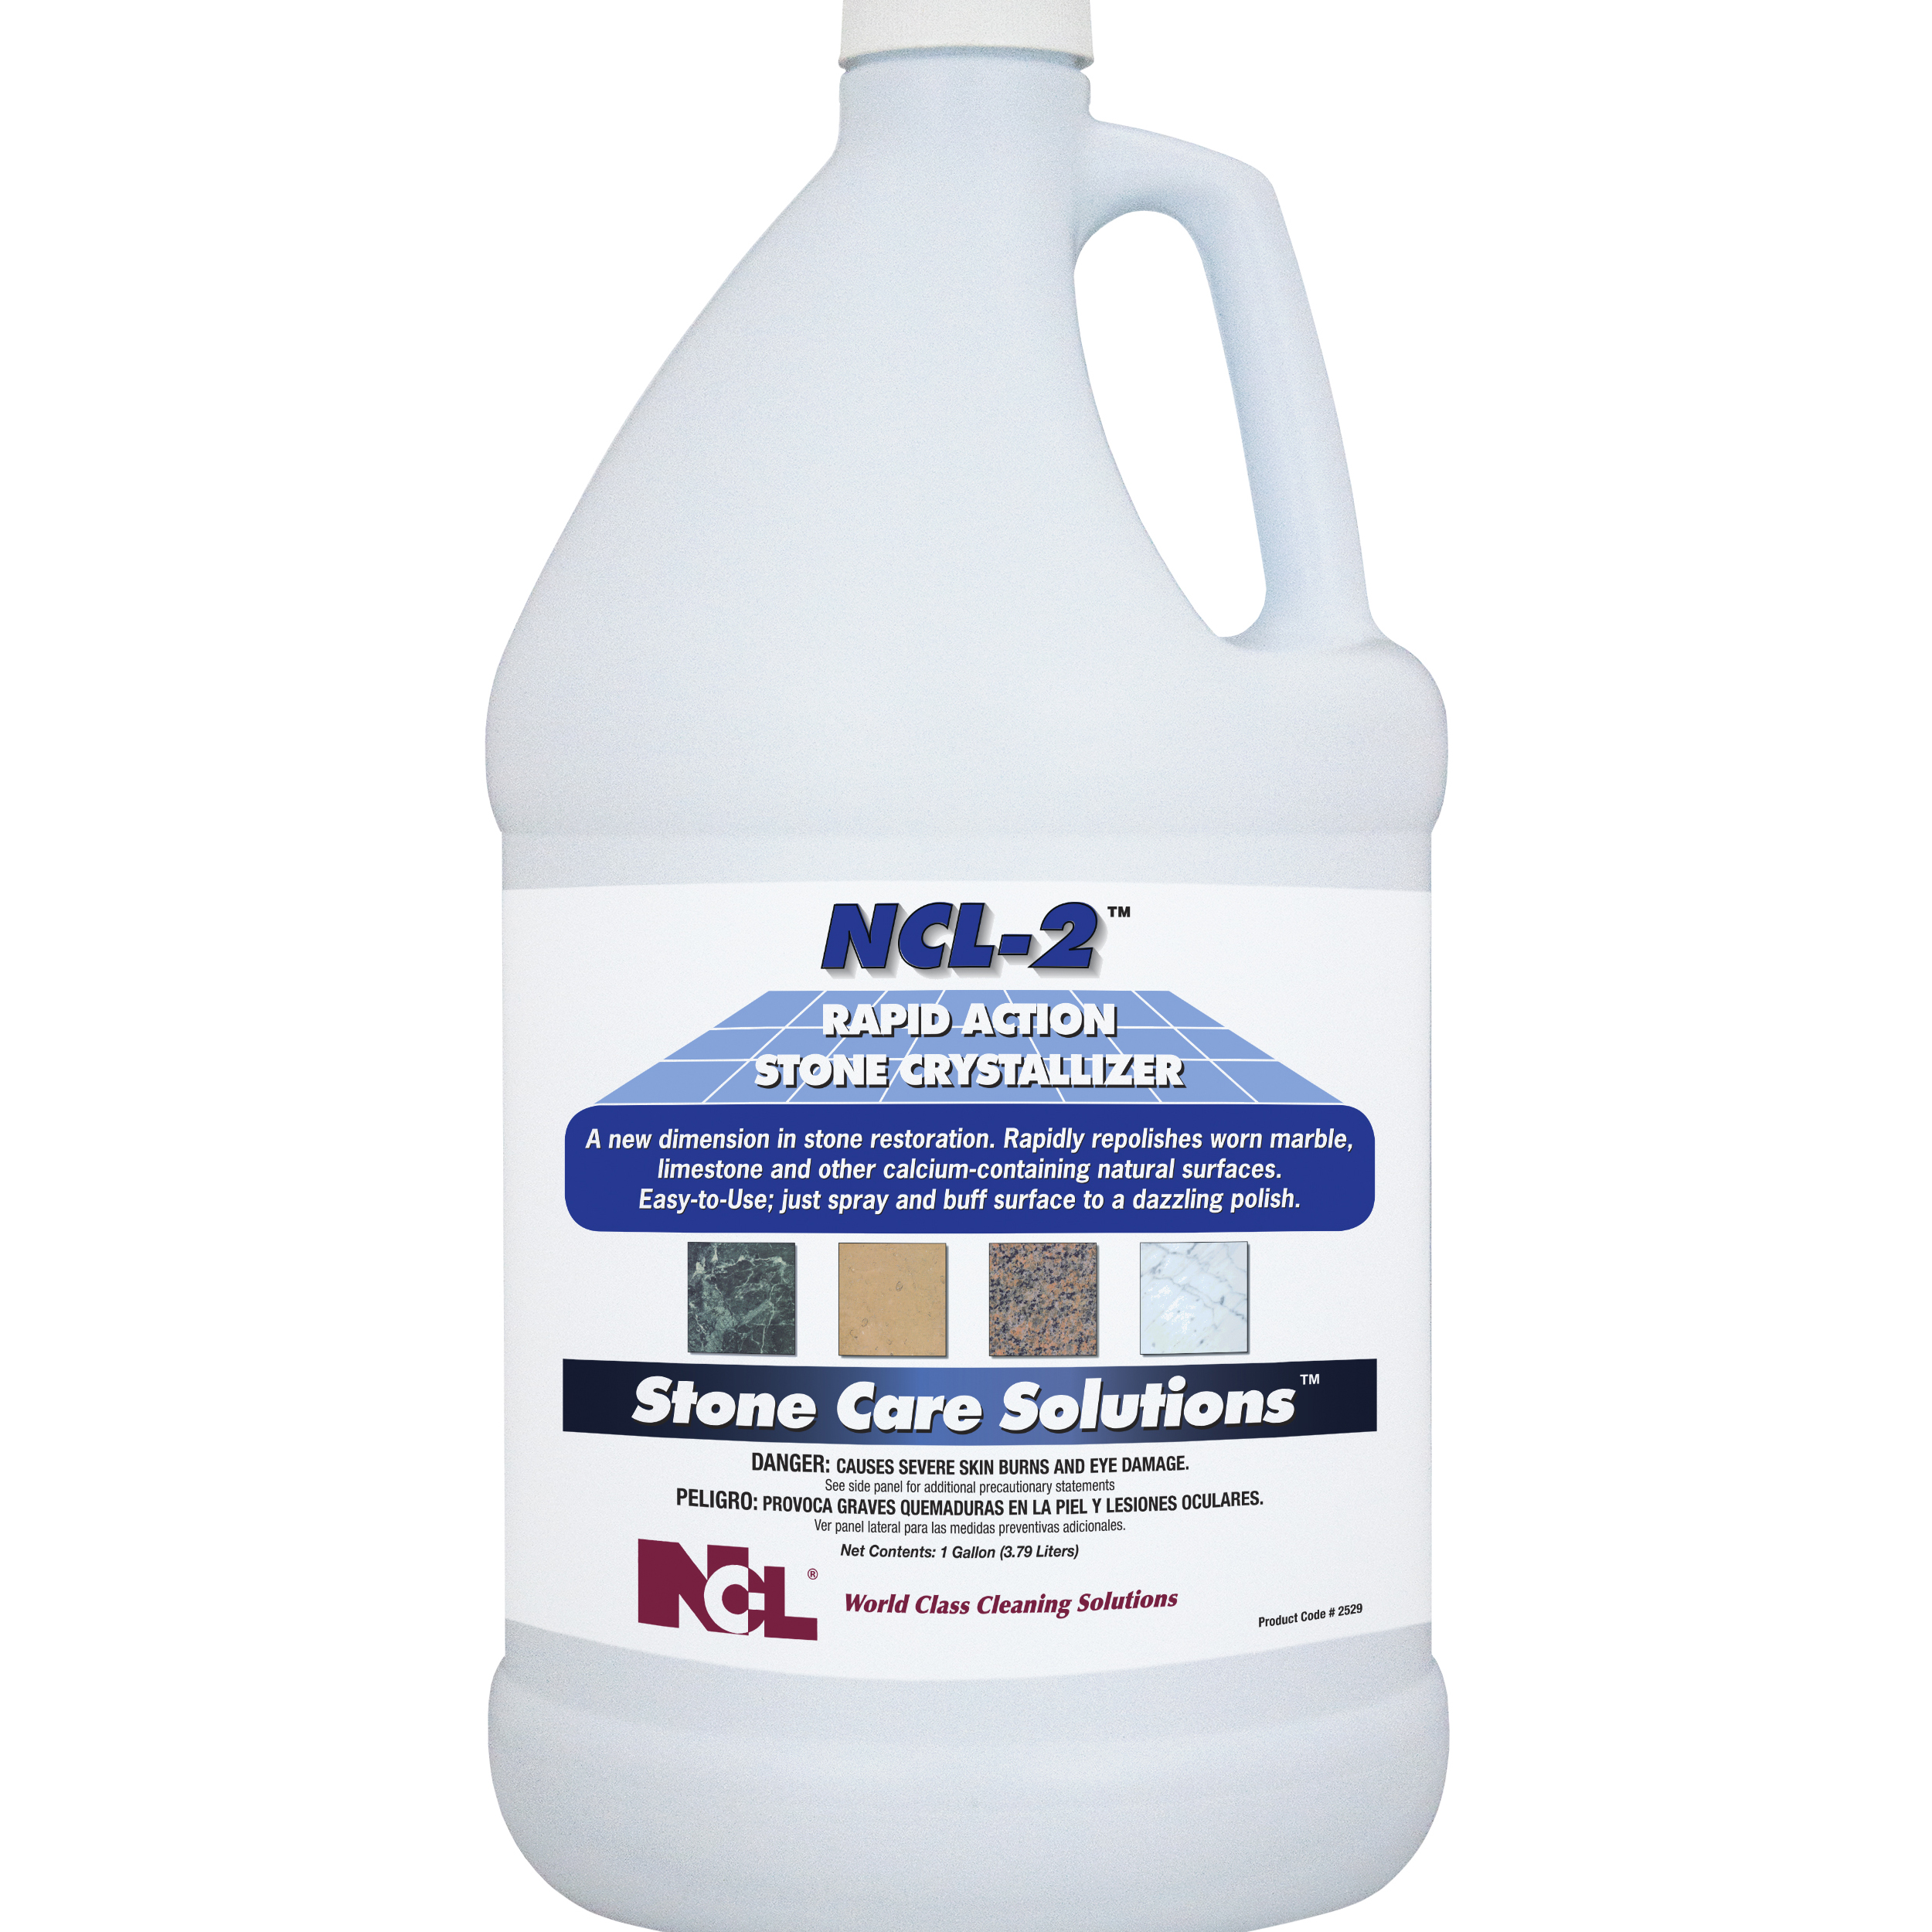  NCL-2 Rapid Action Stone Crystallizer 4/1 Gal. Case (NCL2529-29) 